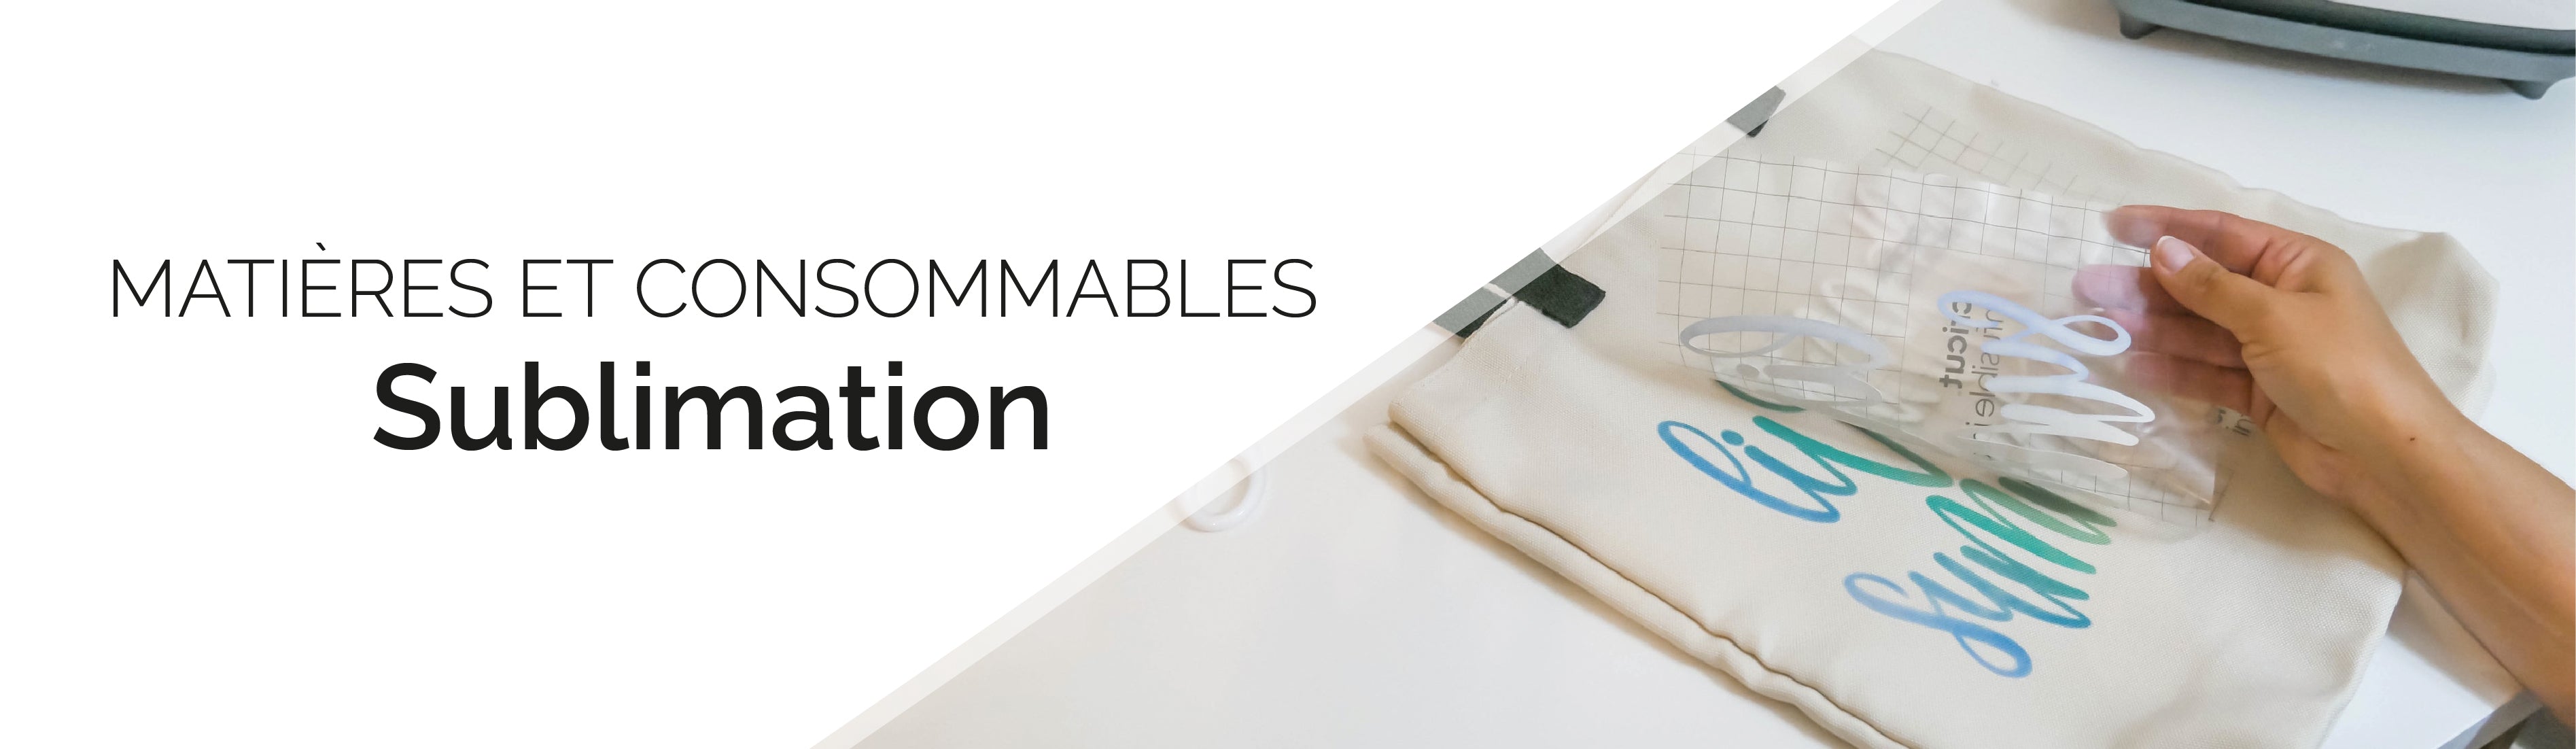 Atome3D - Consommables - Sublimation